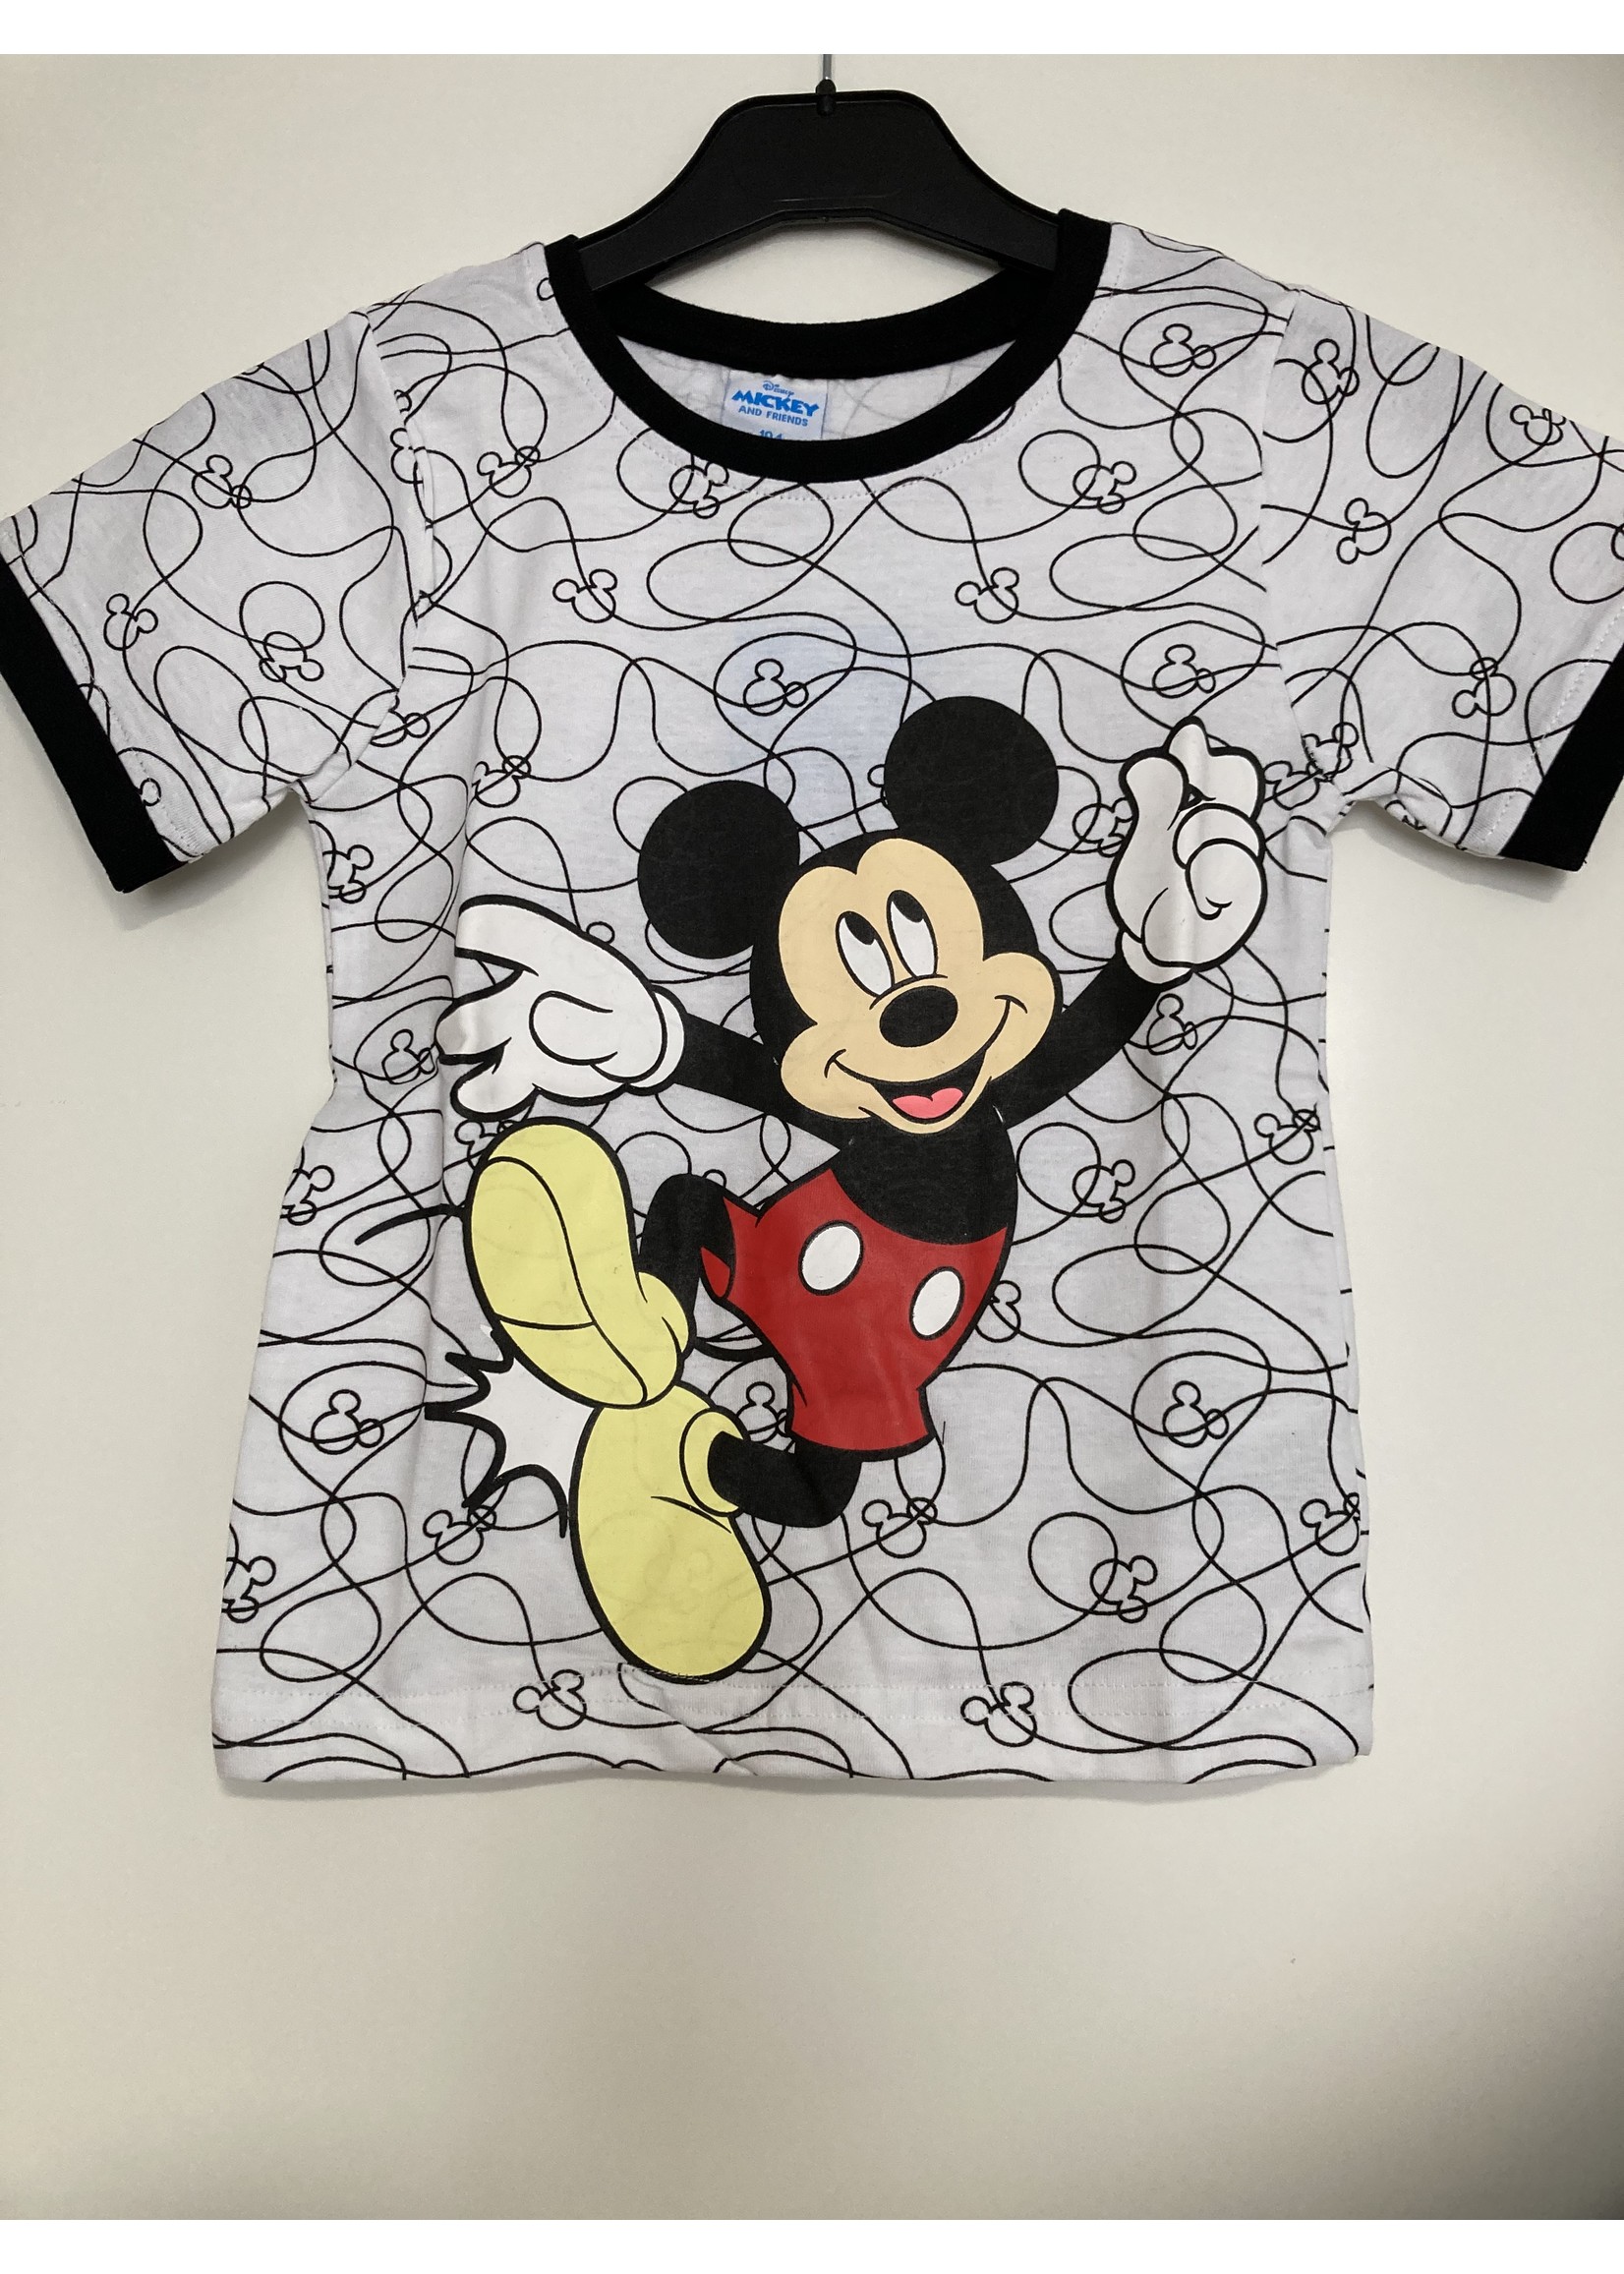 Disney Mickey Mouse T-shirt from Disney white